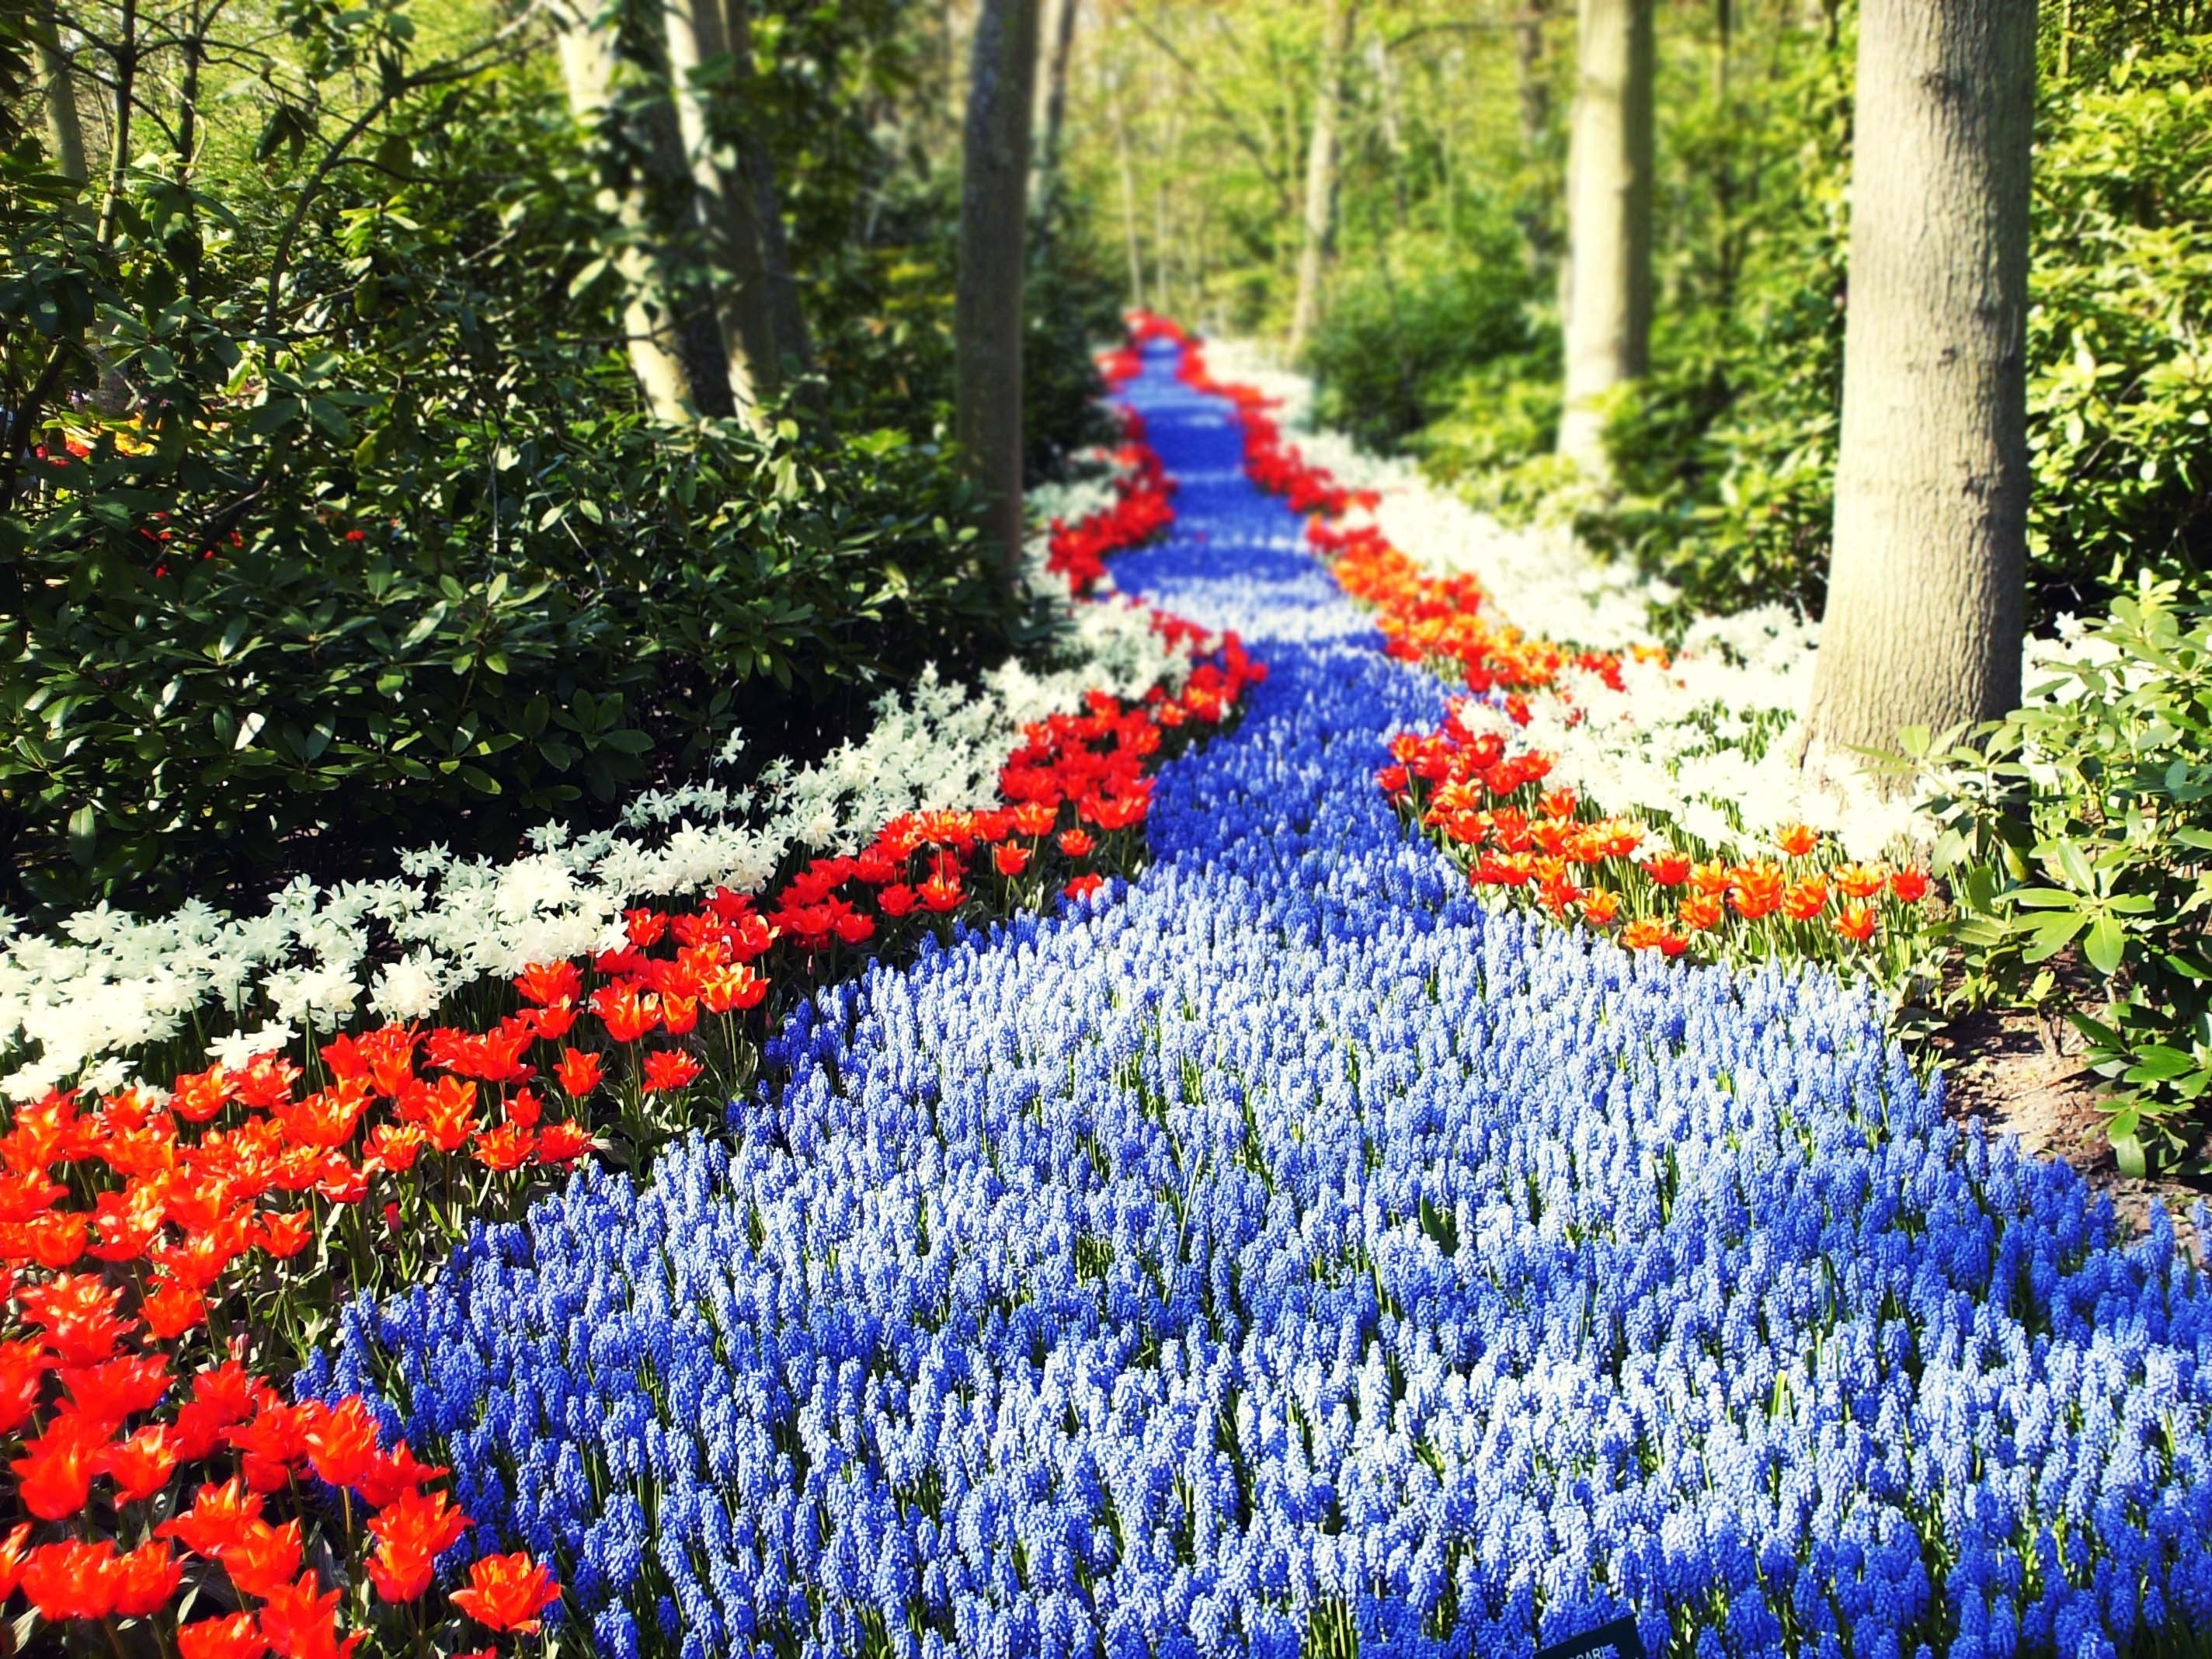 Wallpaper. Flowers. photo. picture. road, the sun, flowers, Holland, path